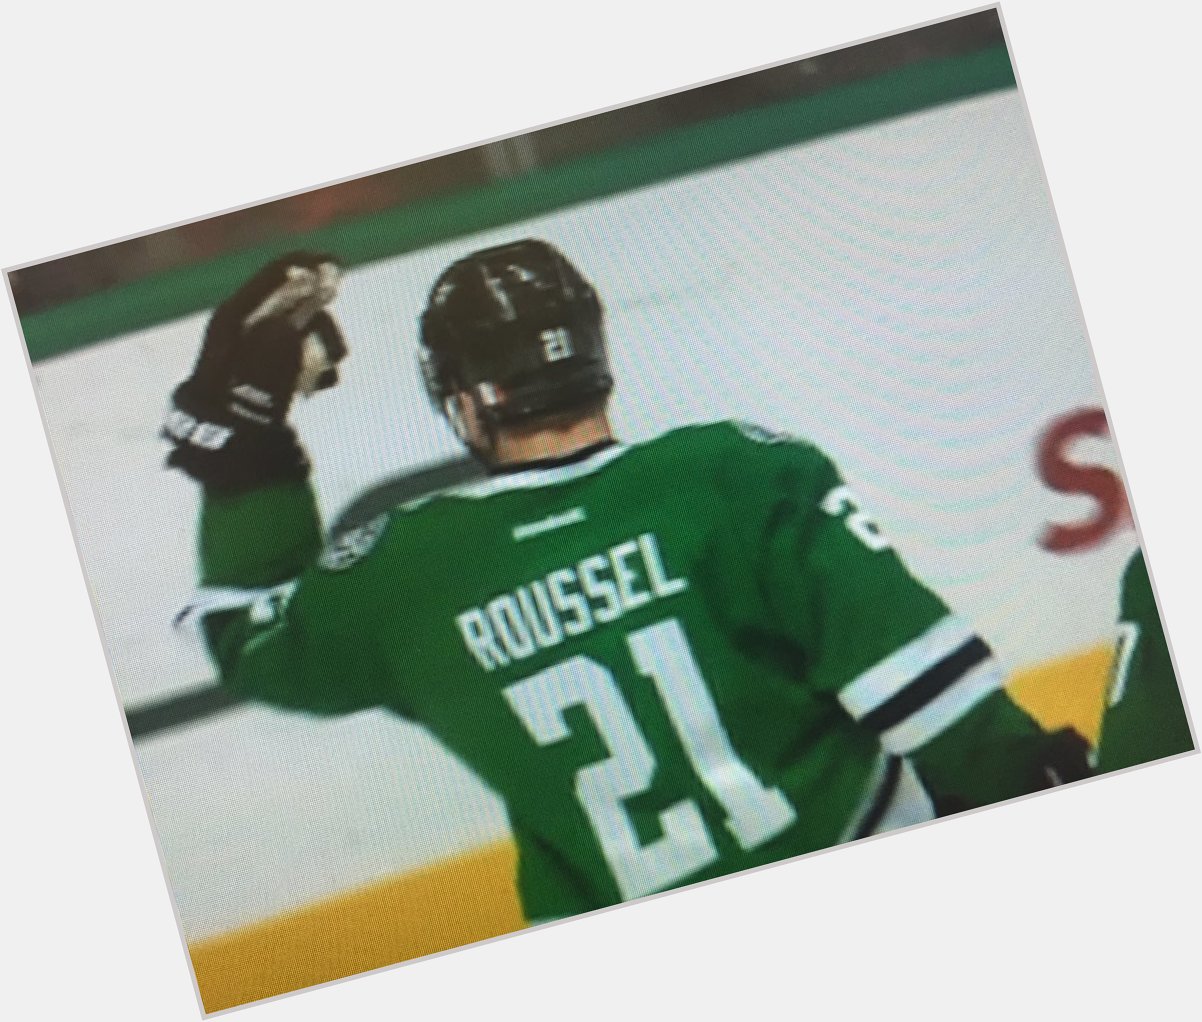 Happy birthday Antoine Roussel who had a goal tonight, and the beat the 3-0. 17 wins WOW 